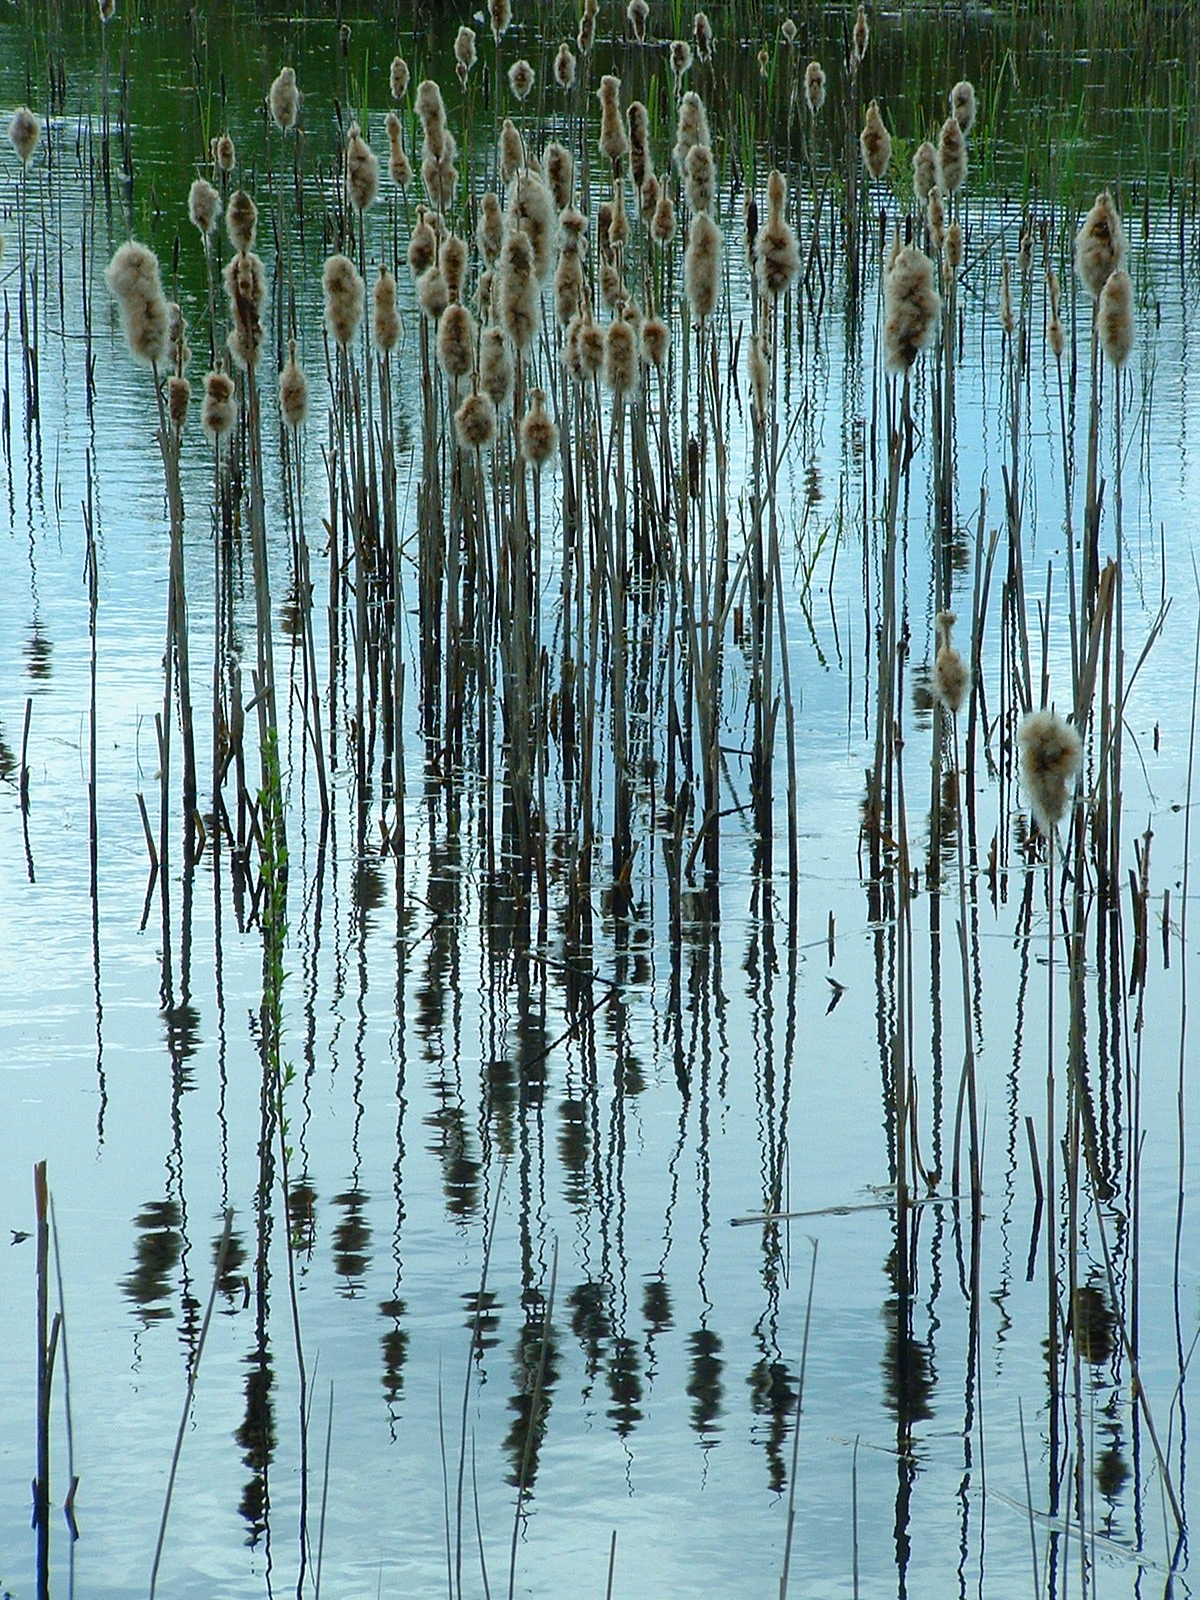 this is an image of reeds growing in the water